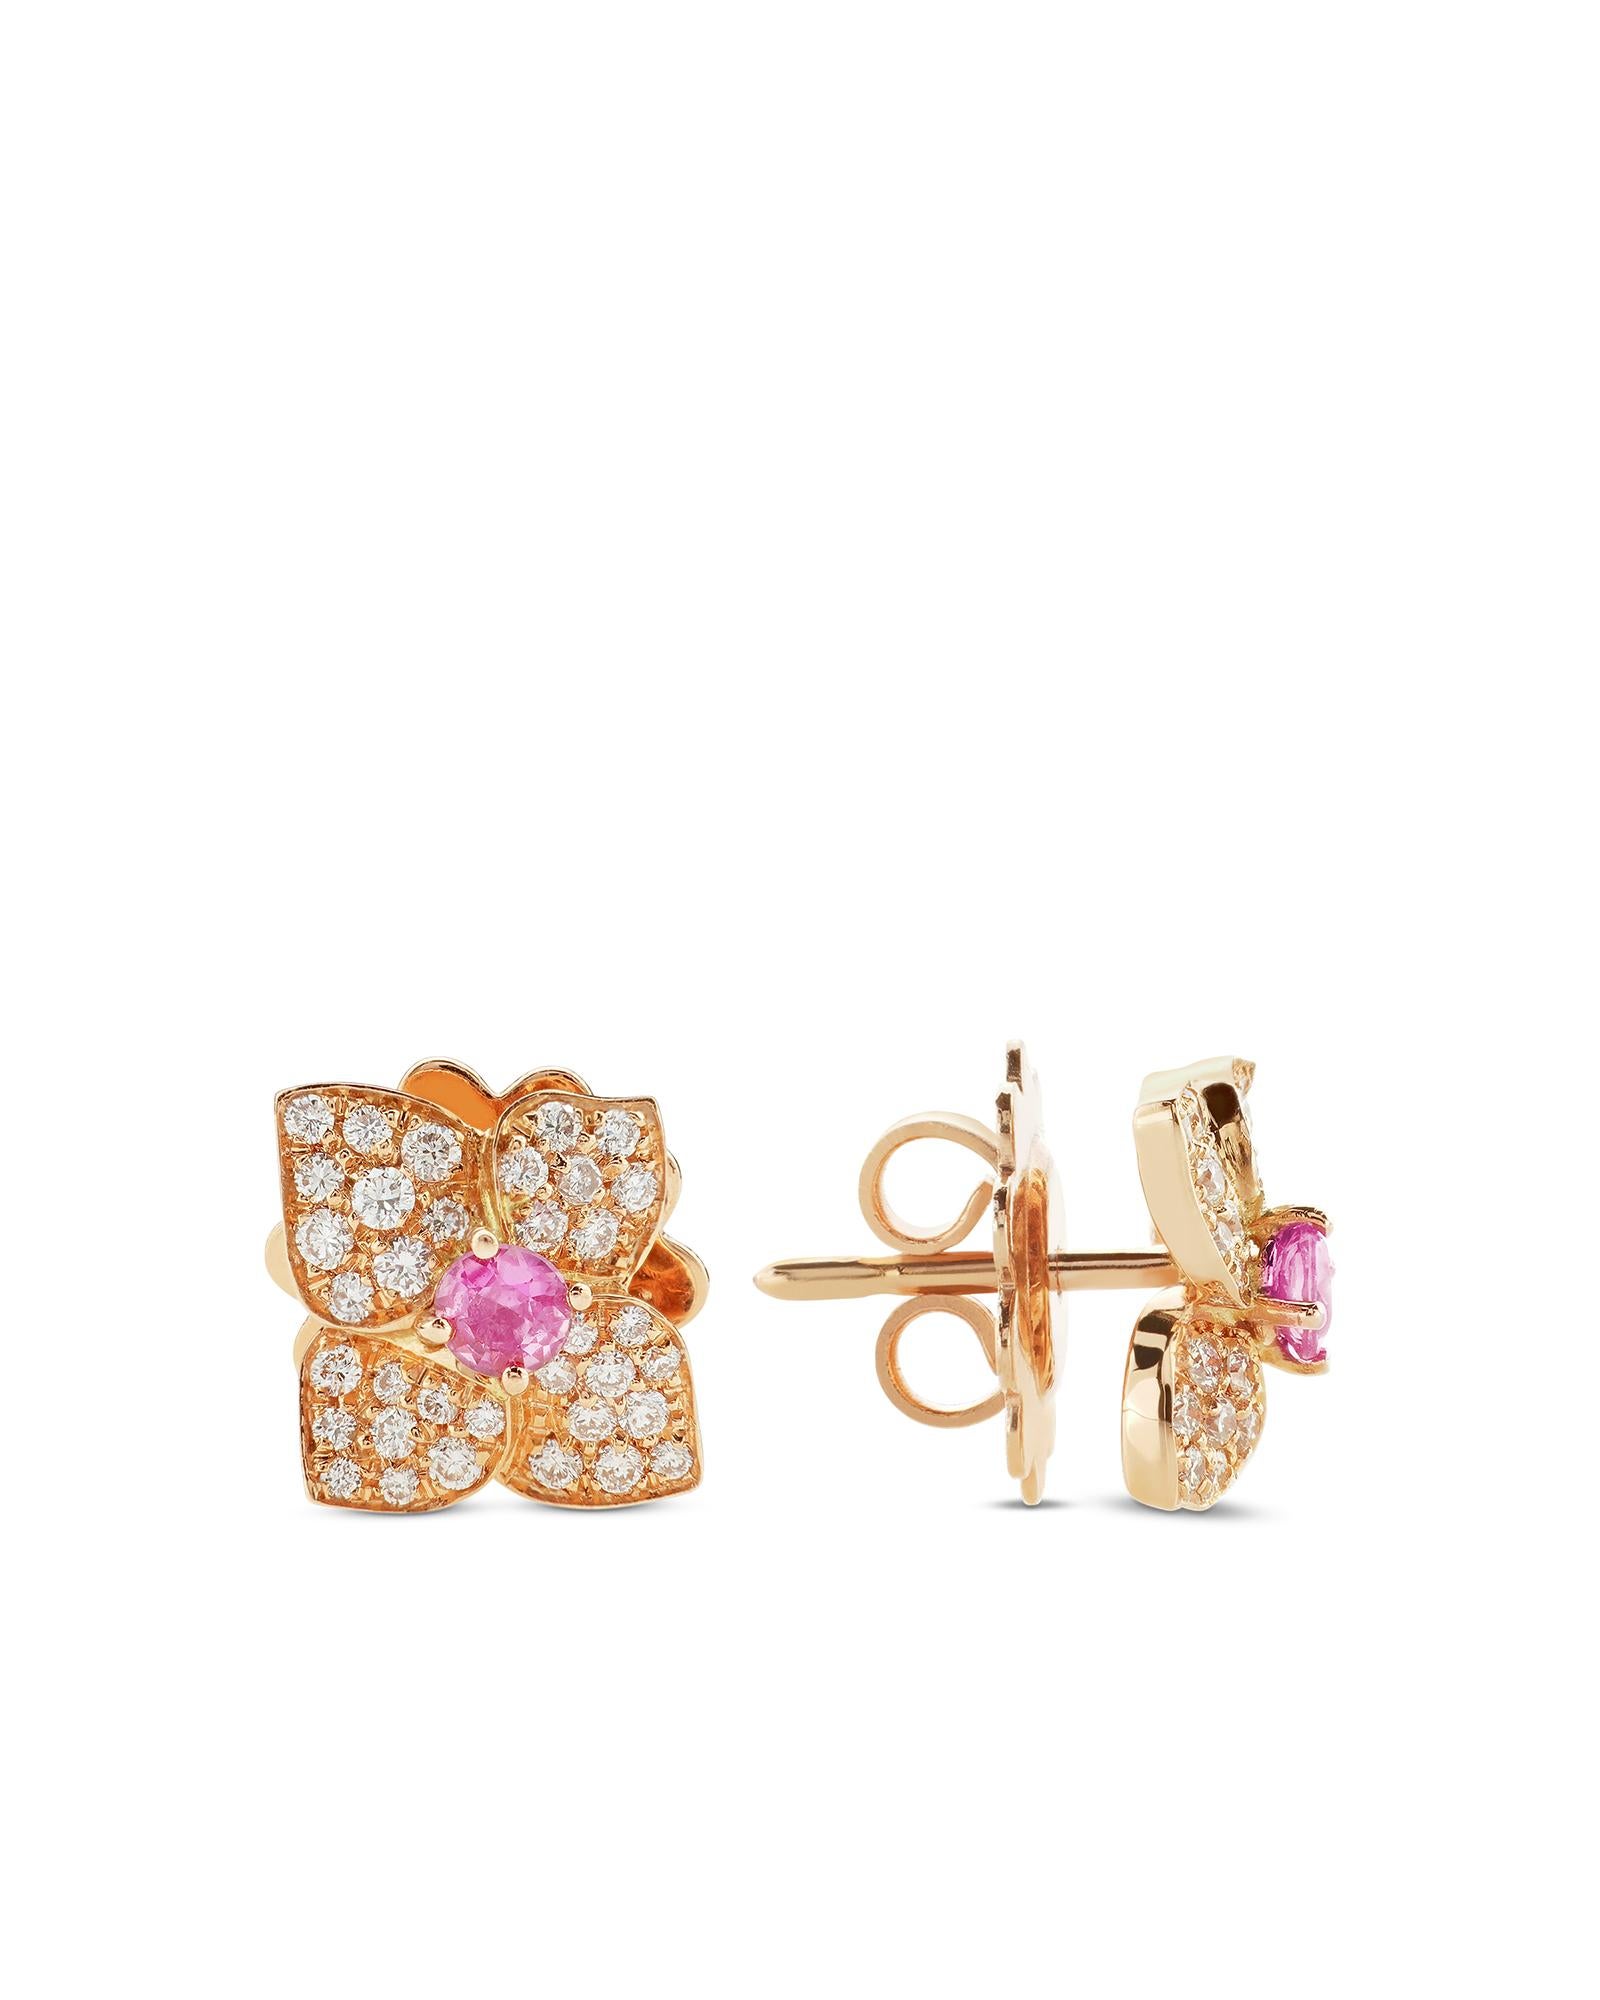 The simplicity and elegance of this rose gold flower is inspired by the floral motifs of Hortense.
The flowers placed on the earrings is decorated with white diamonds and embellished with pink sapphire gemstone that give shine to the